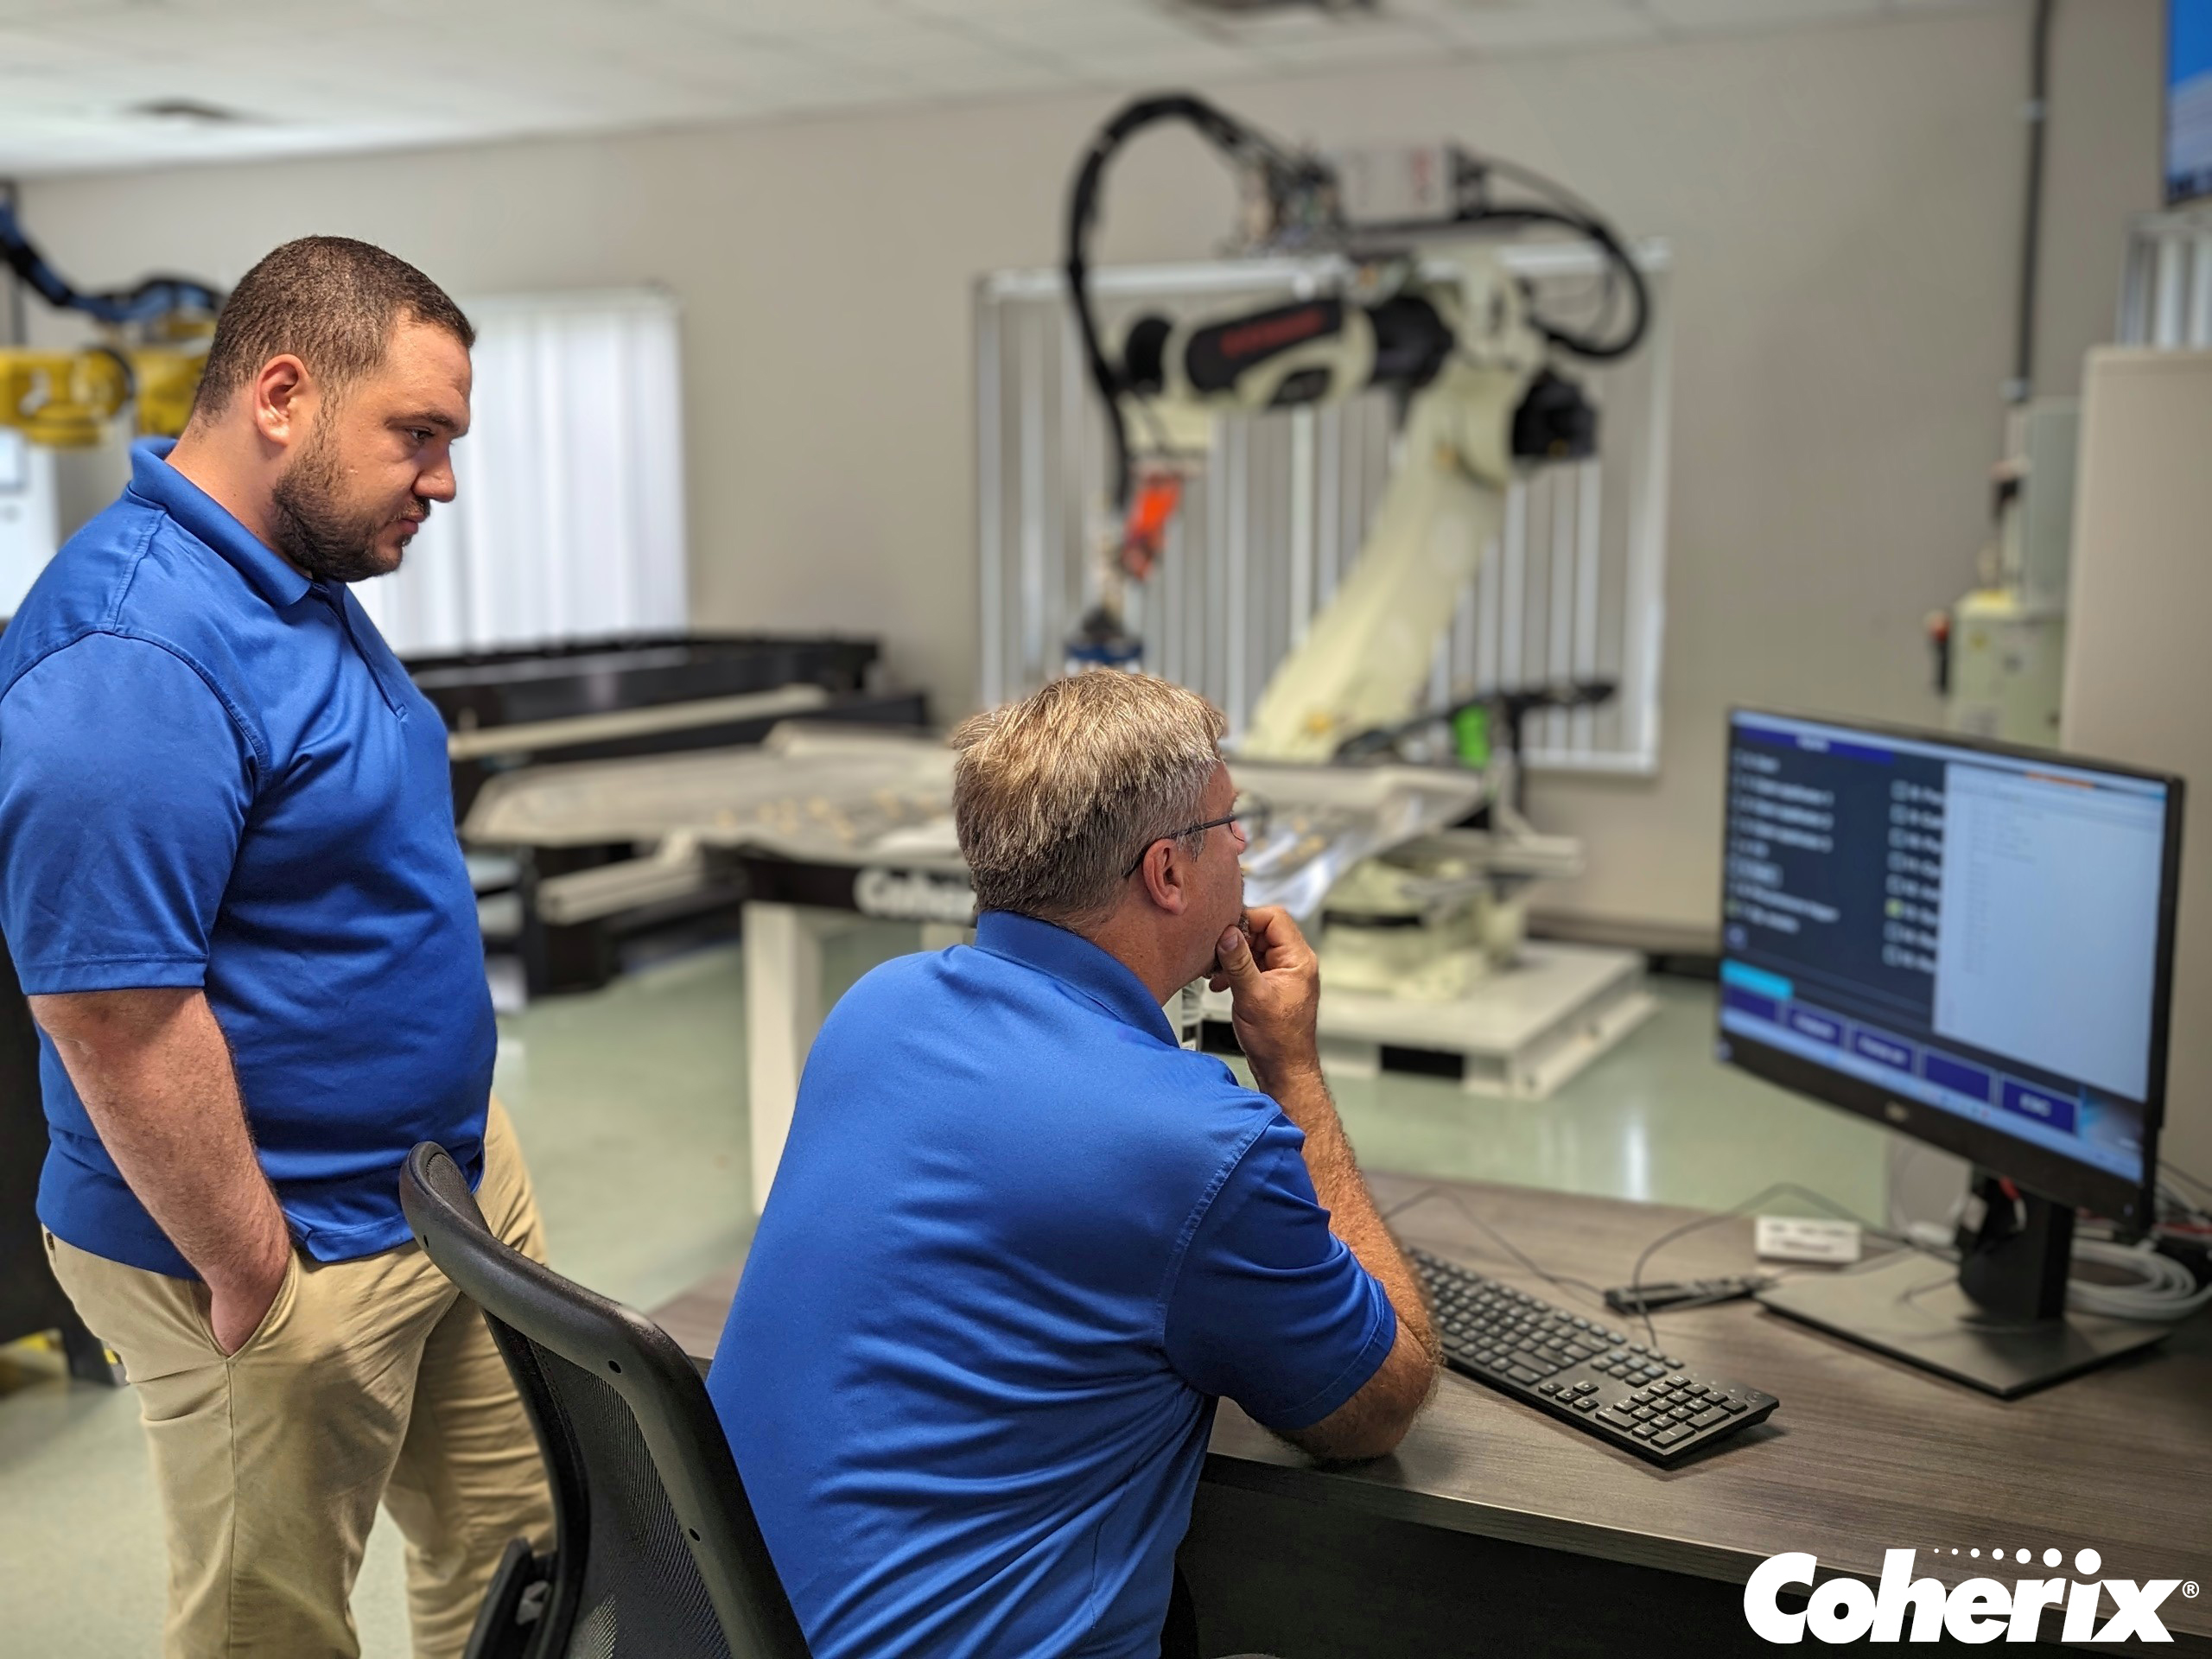 Robot programming is managed by the experienced Dispensing System Engineering Team at Coherix